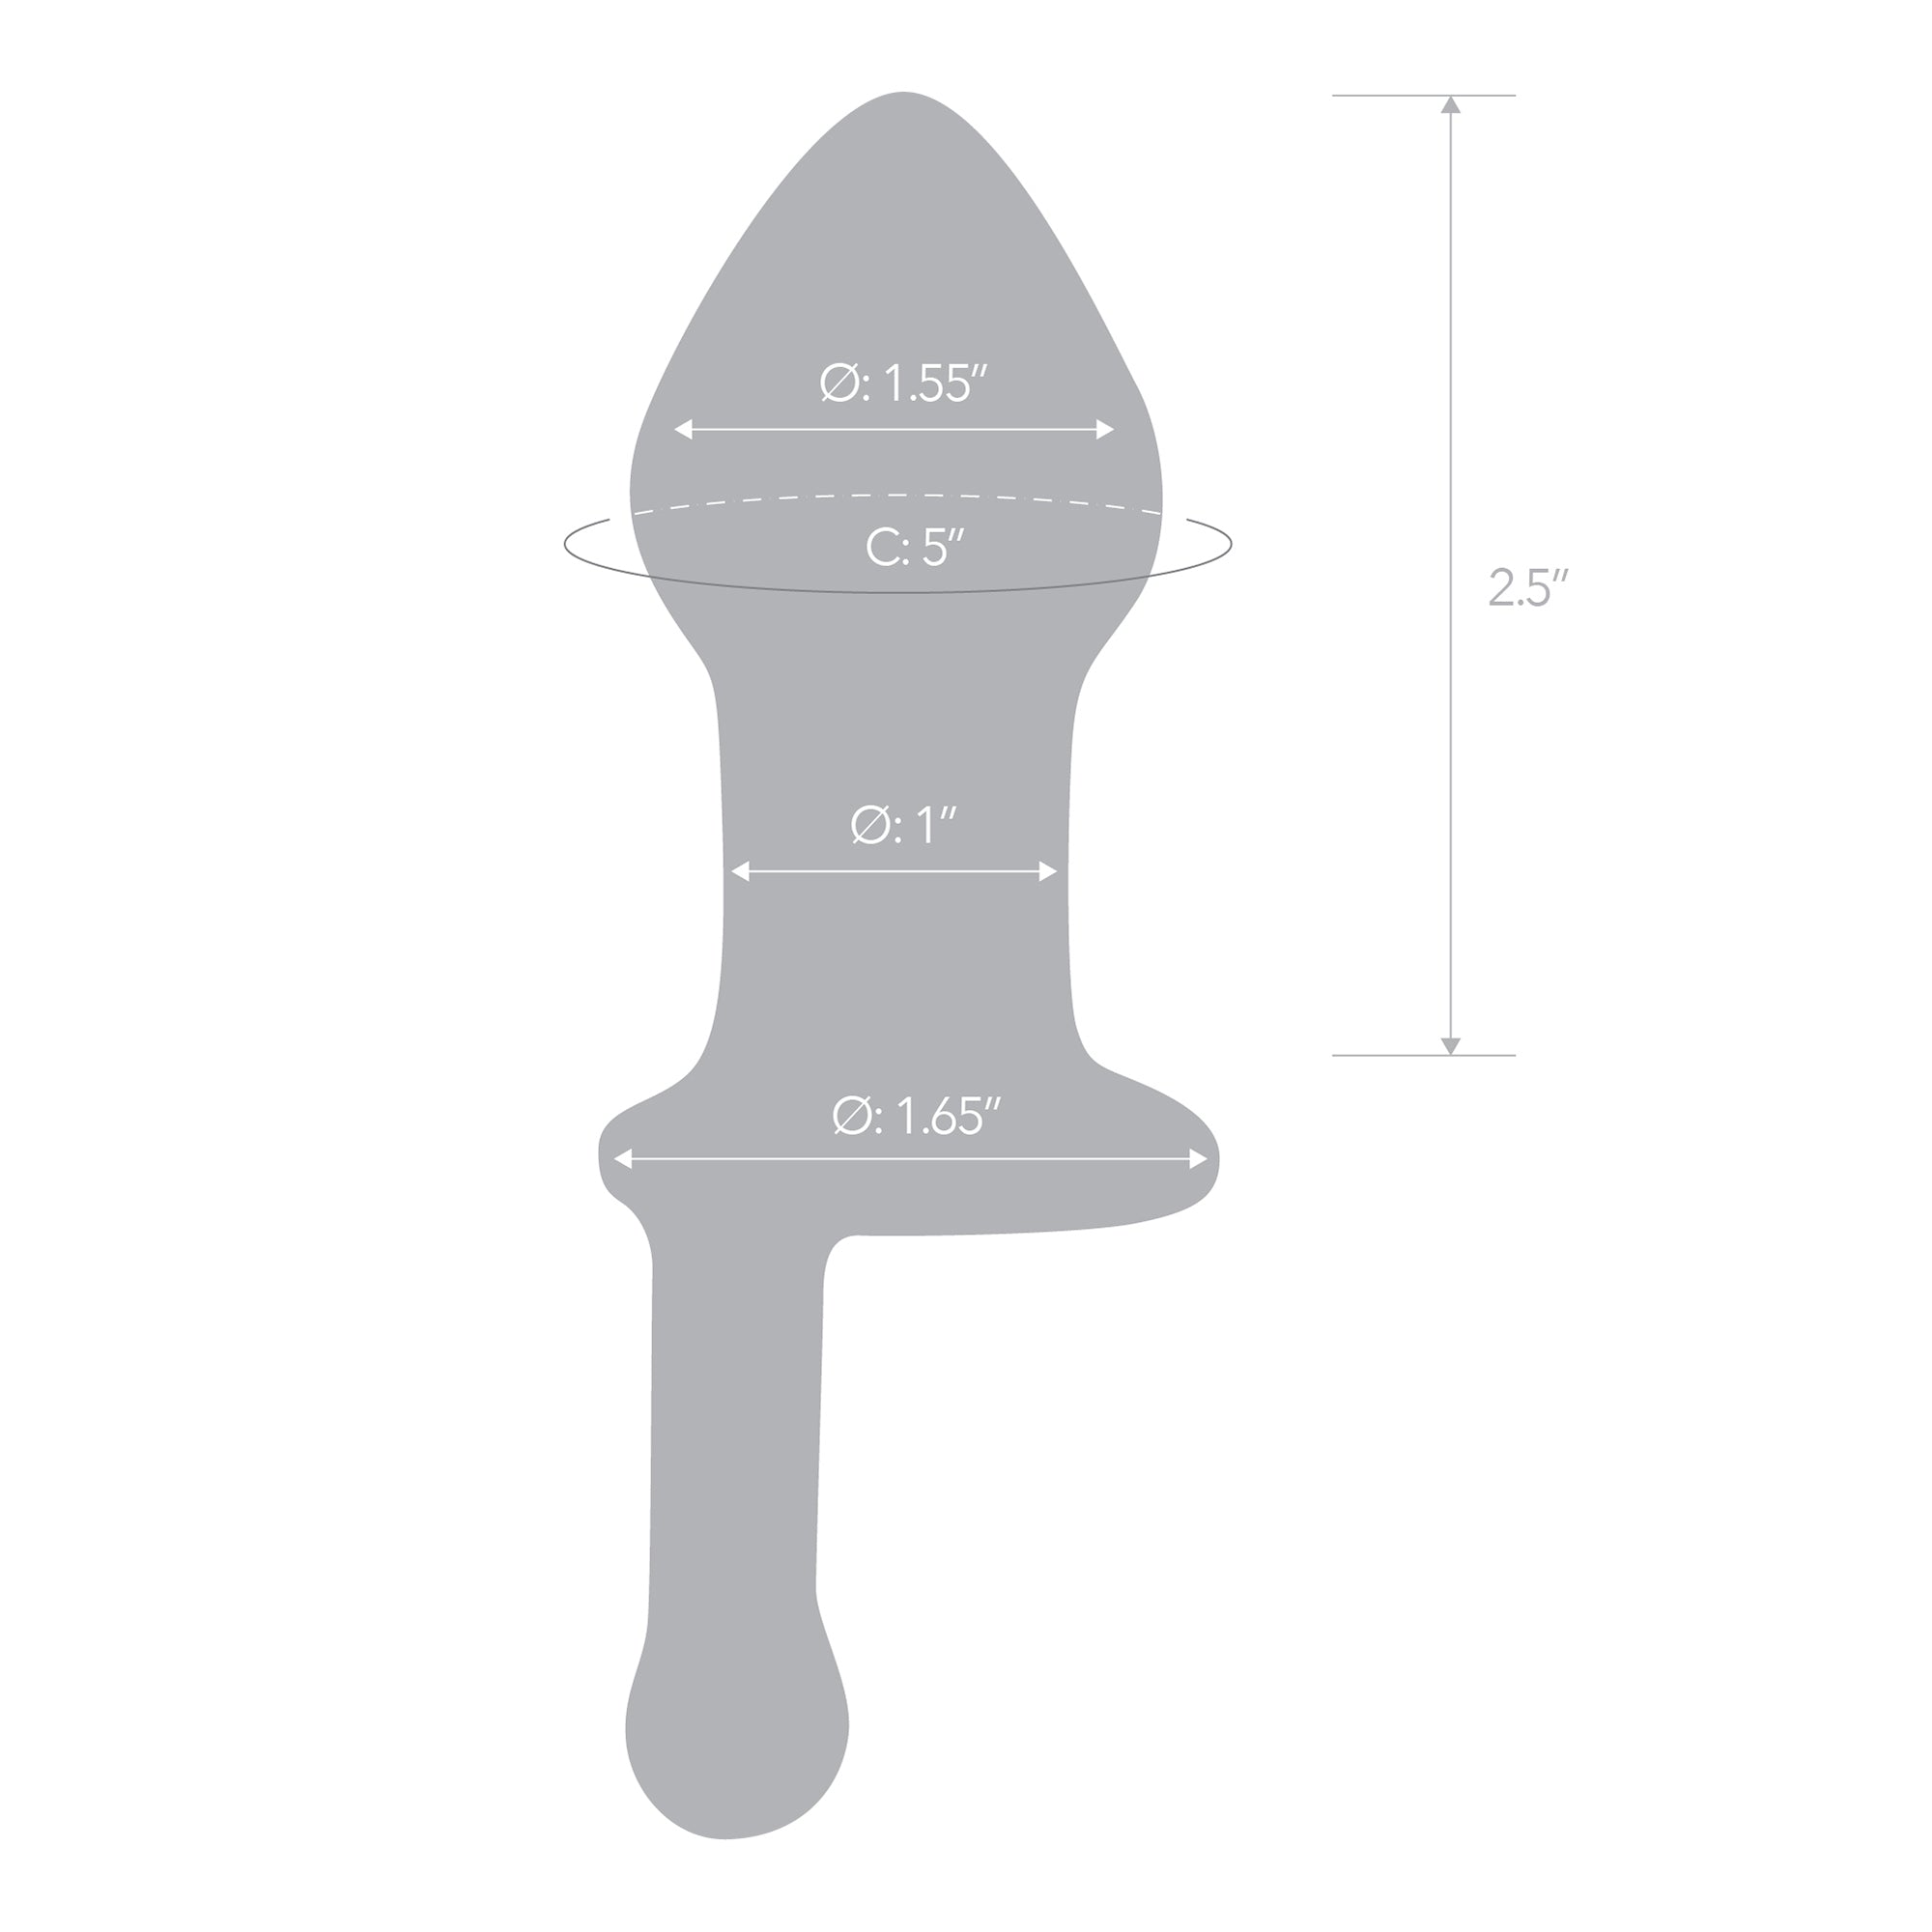 Specifications of the Gläs 5 inch Glass Juicer Glass Butt Plug